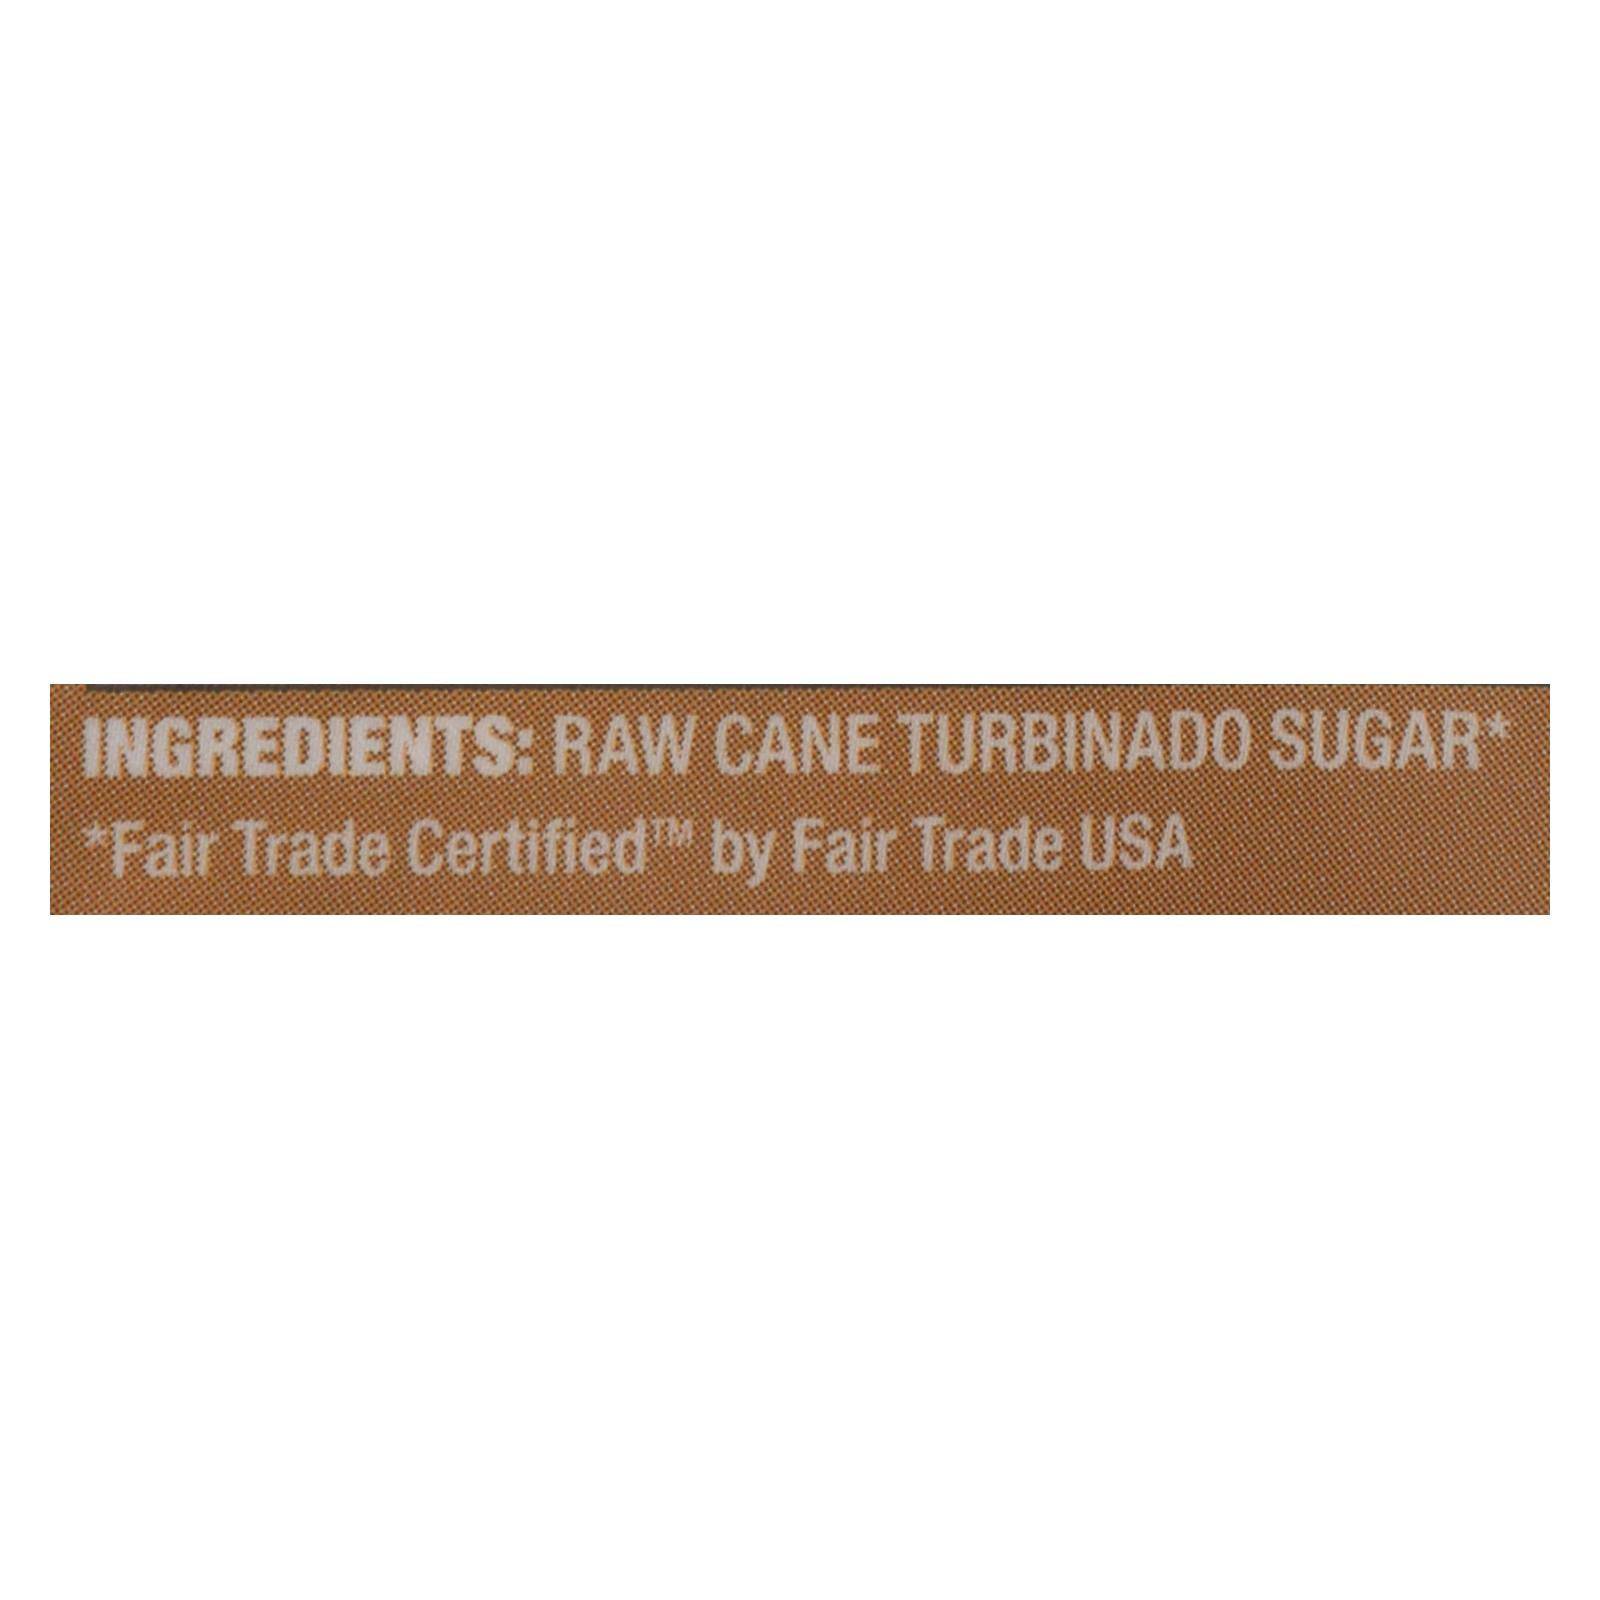 Wholesome Sweeteners Sugar - Natural Raw Cane - Turbinado - Fair Trade - 1.5 Lb - Case Of 12 | OnlyNaturals.us